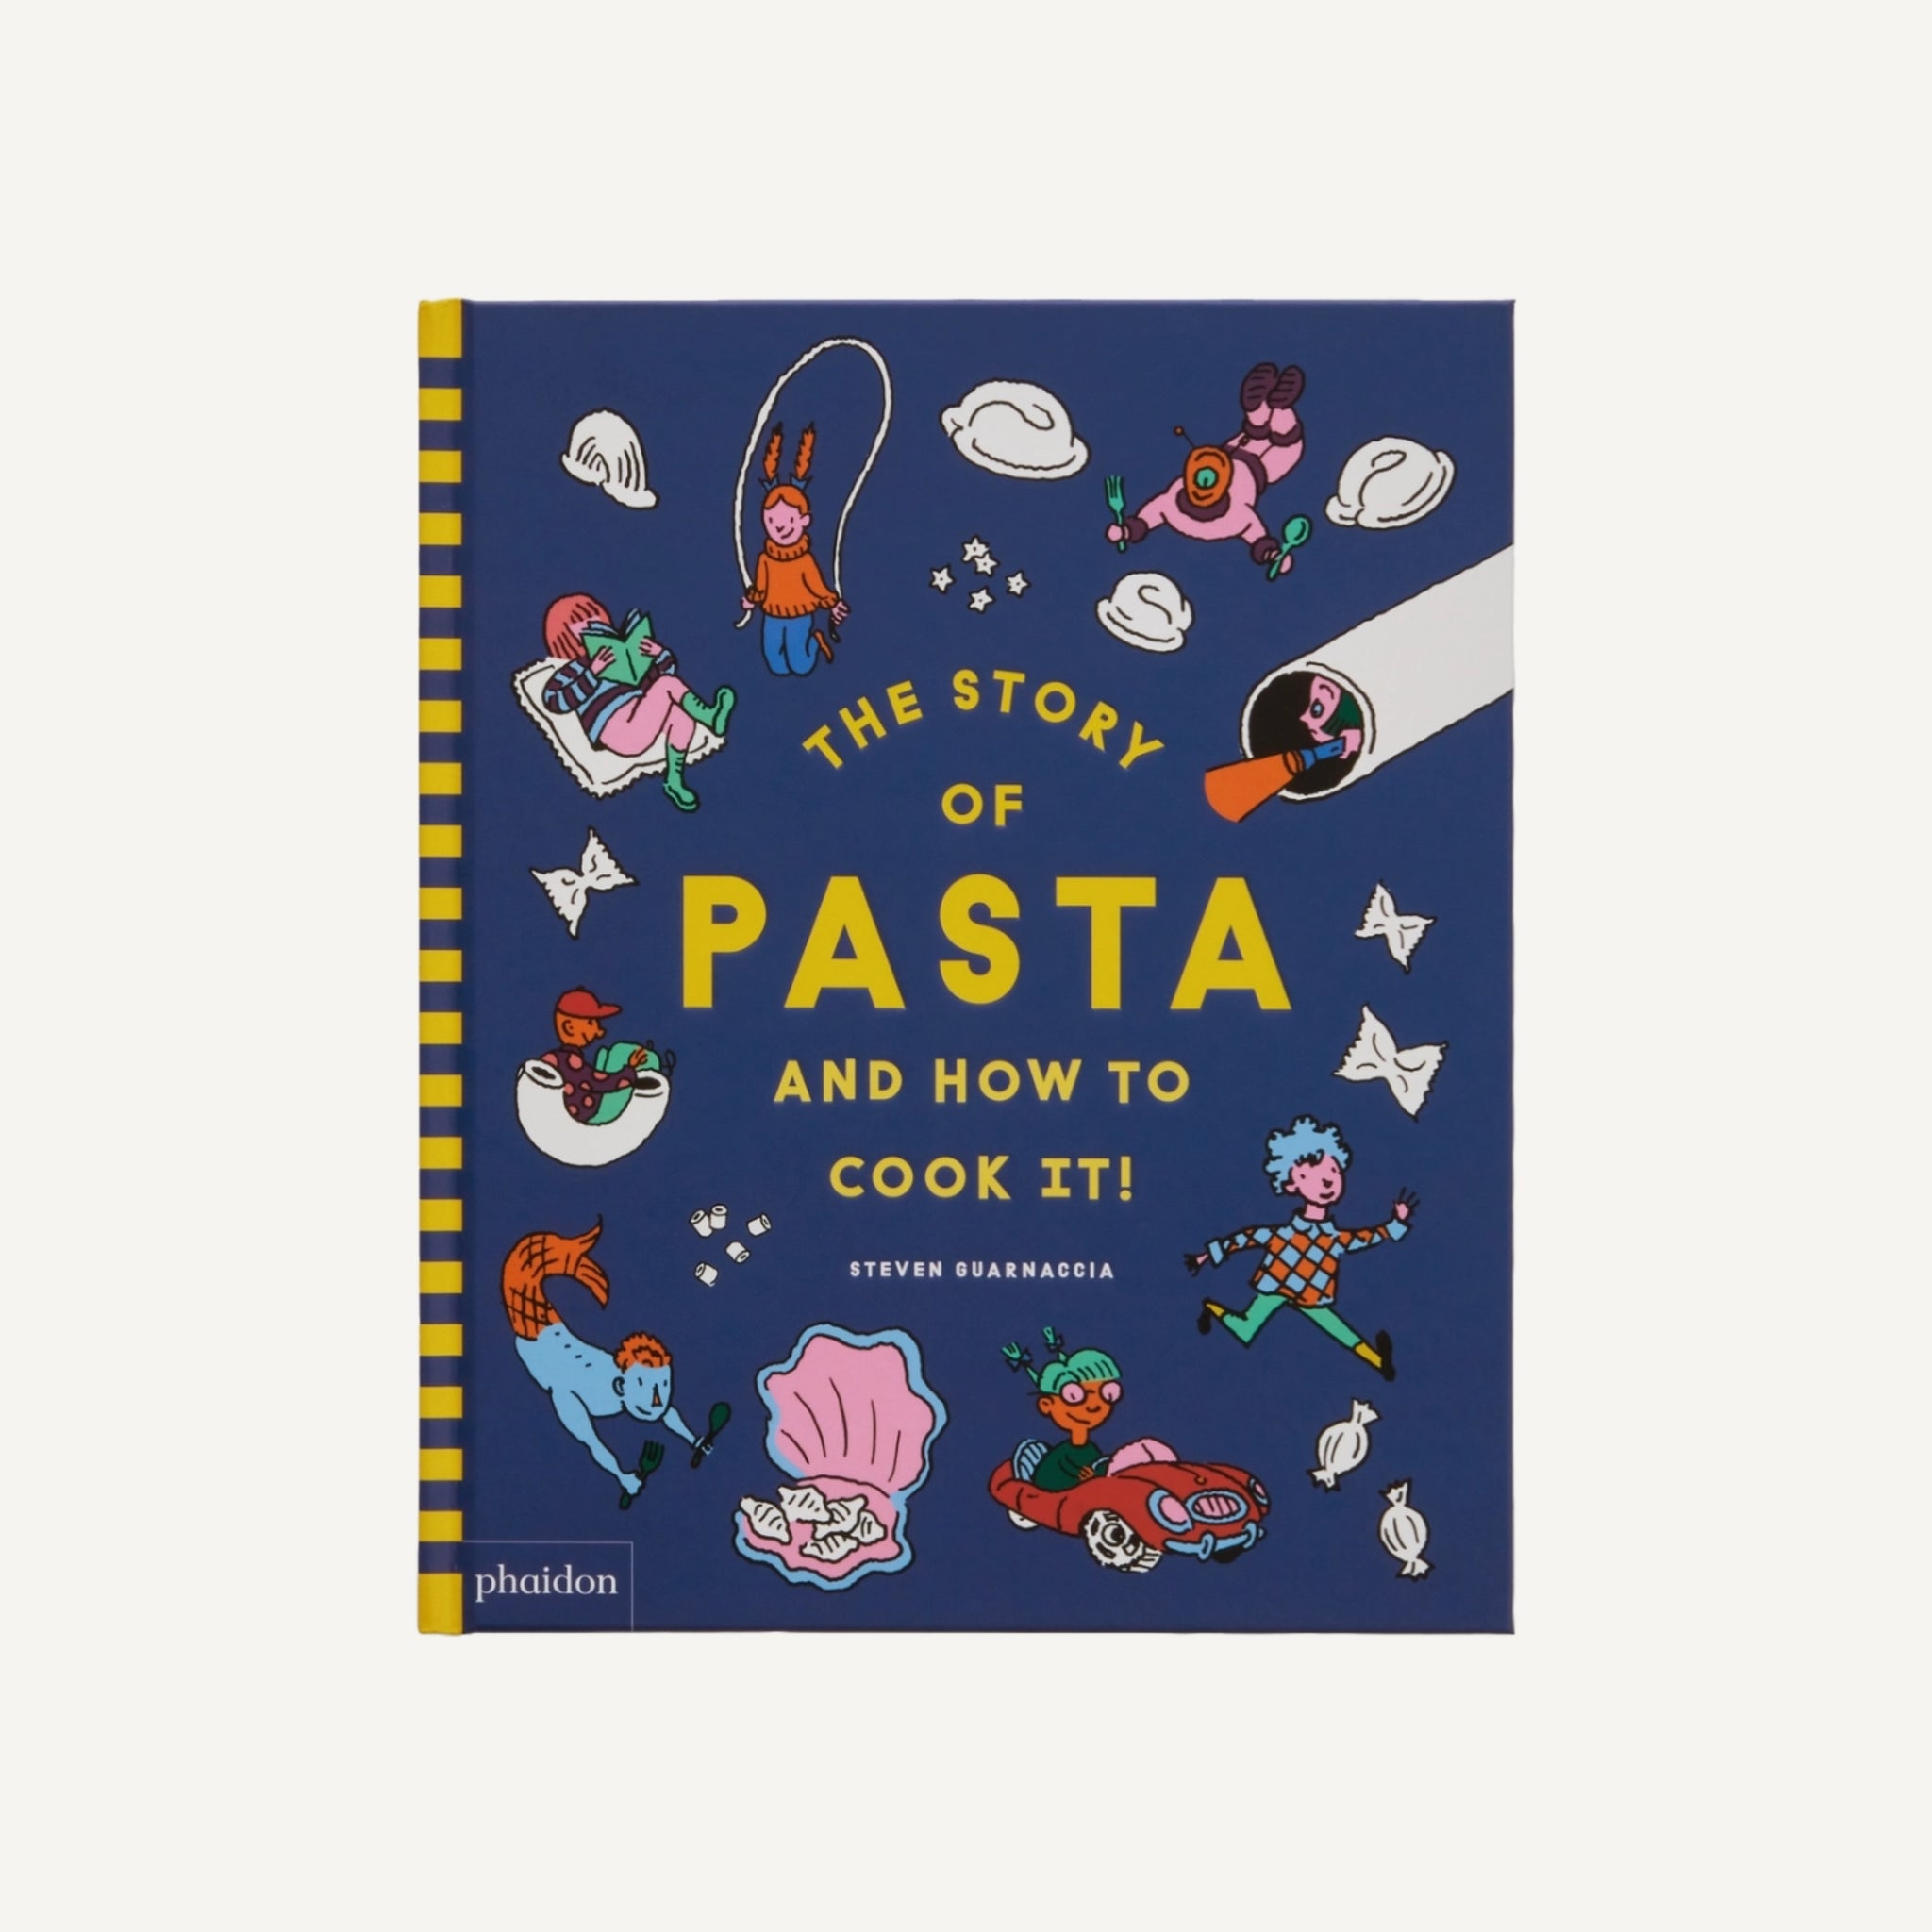 THE STORY OF PASTA AND HOW TO COOK IT